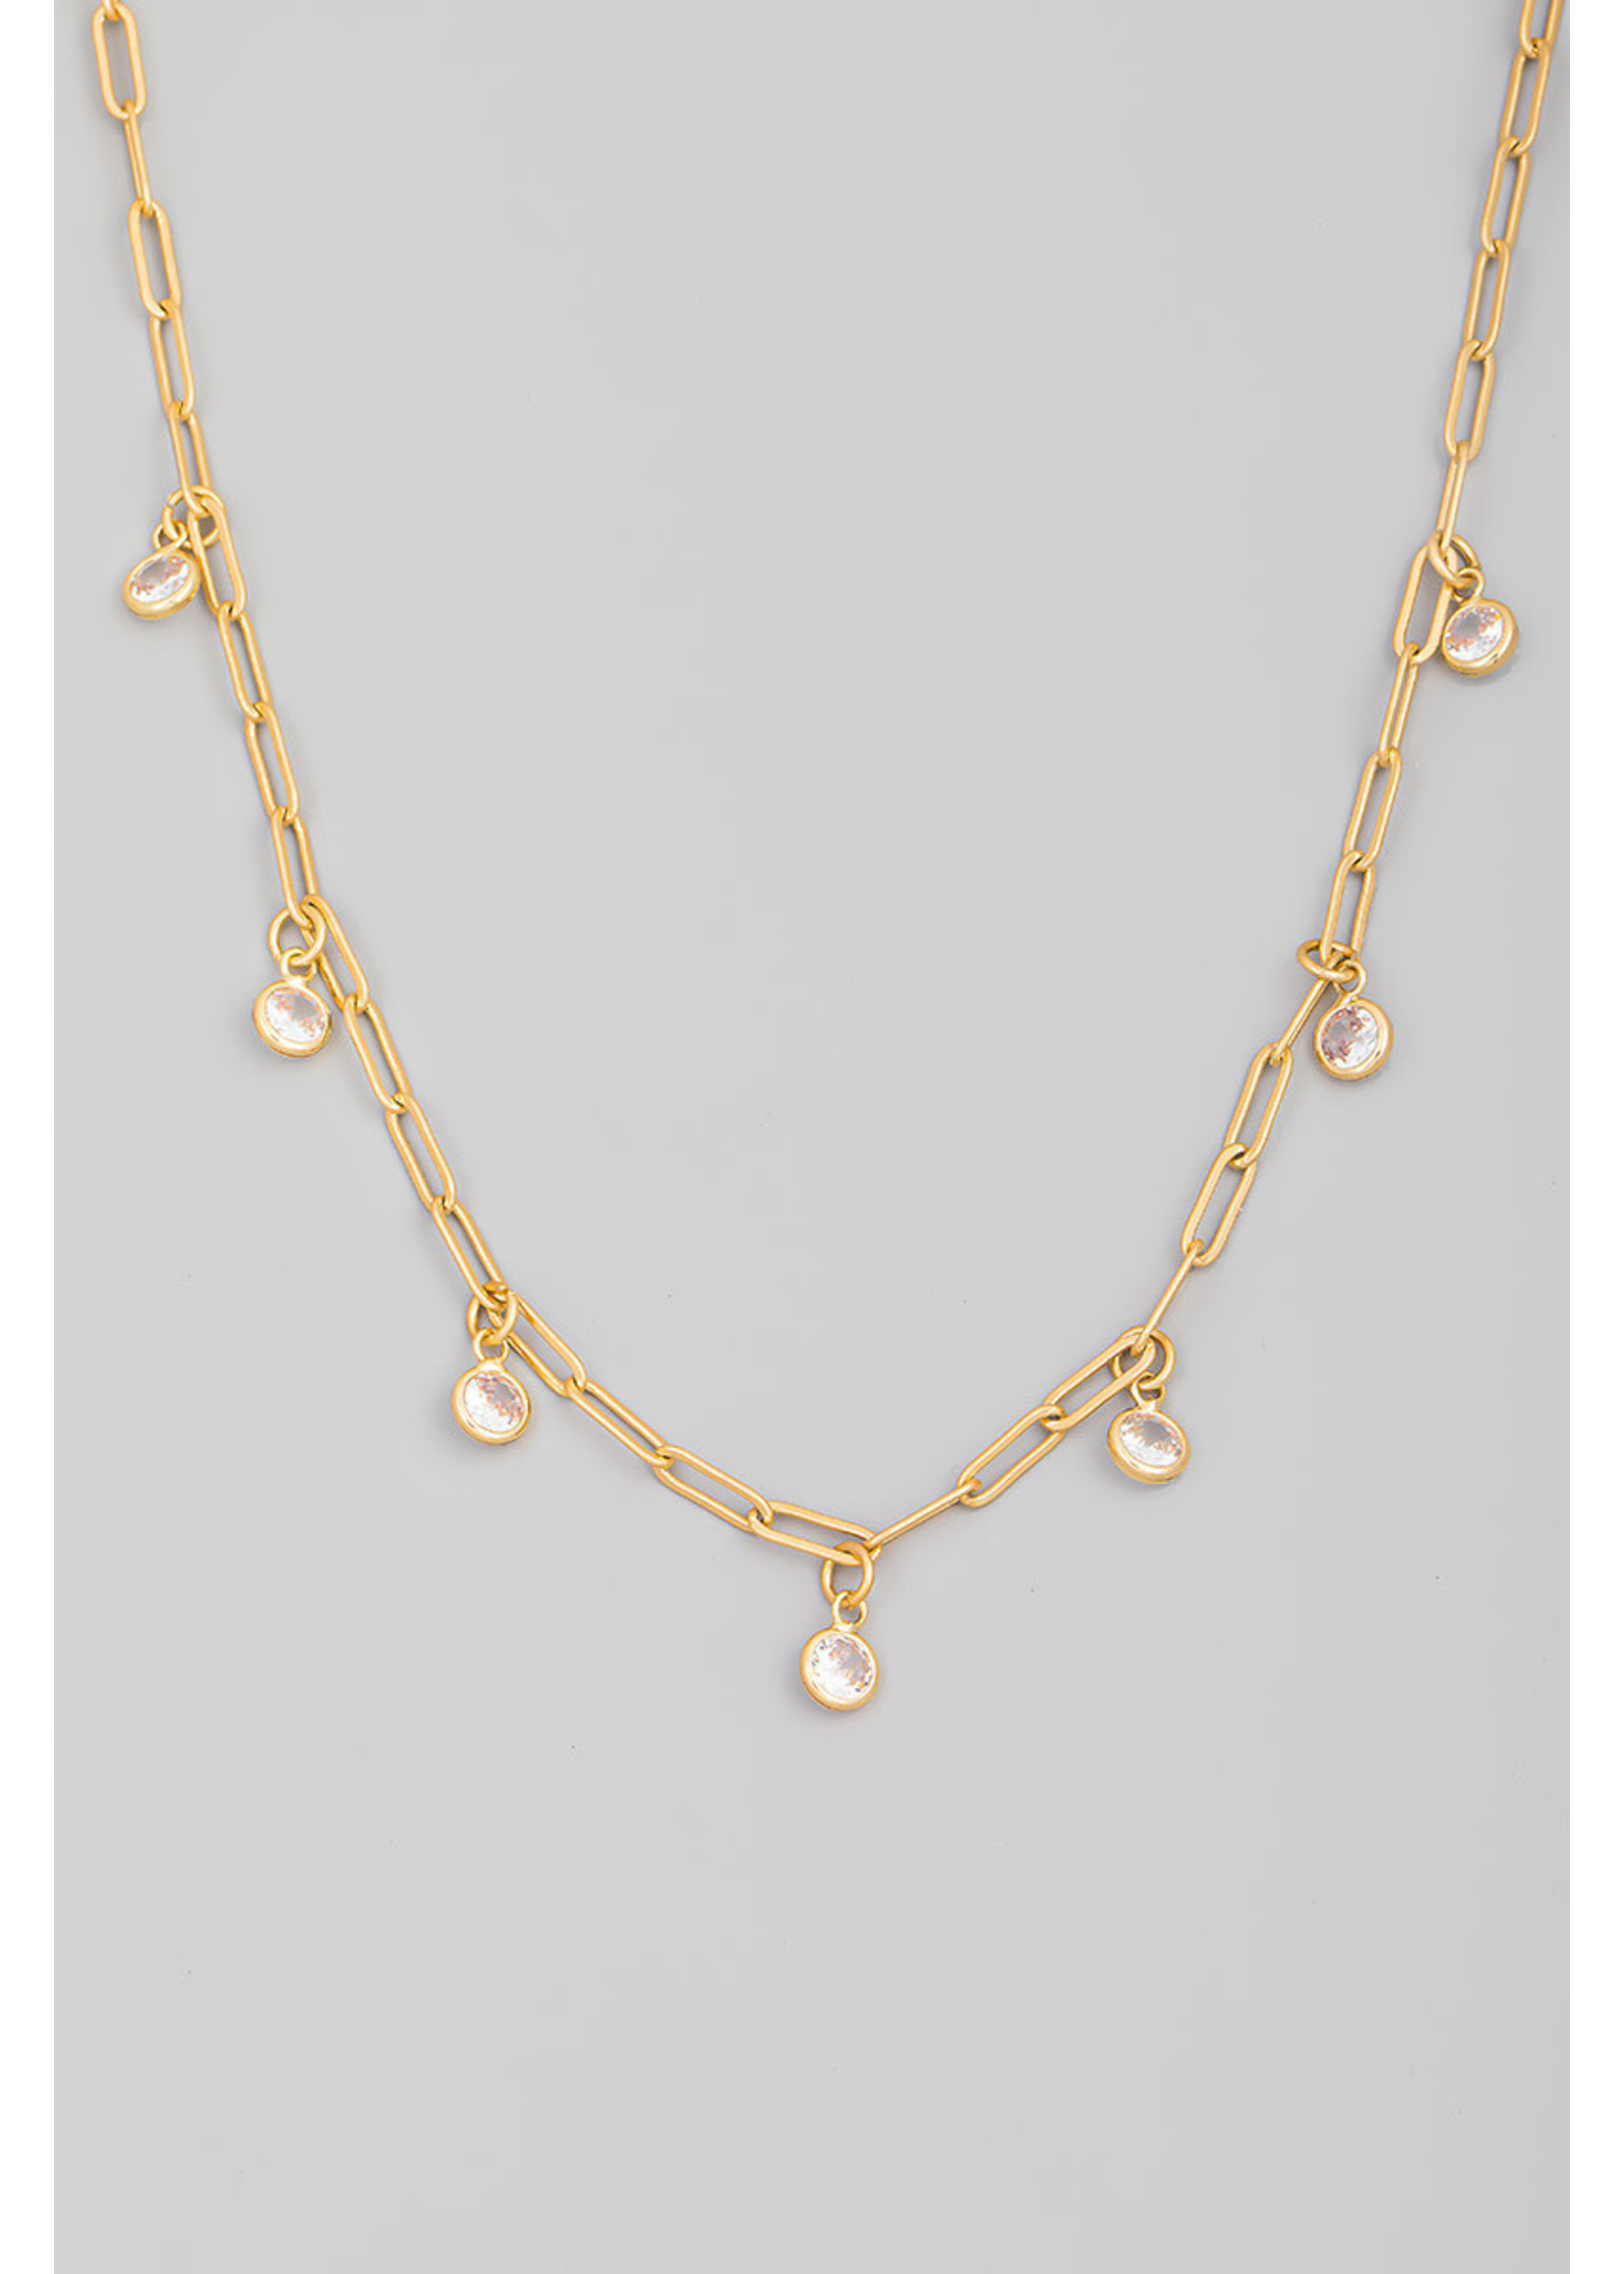 Rhinestone Stations Chain Necklace